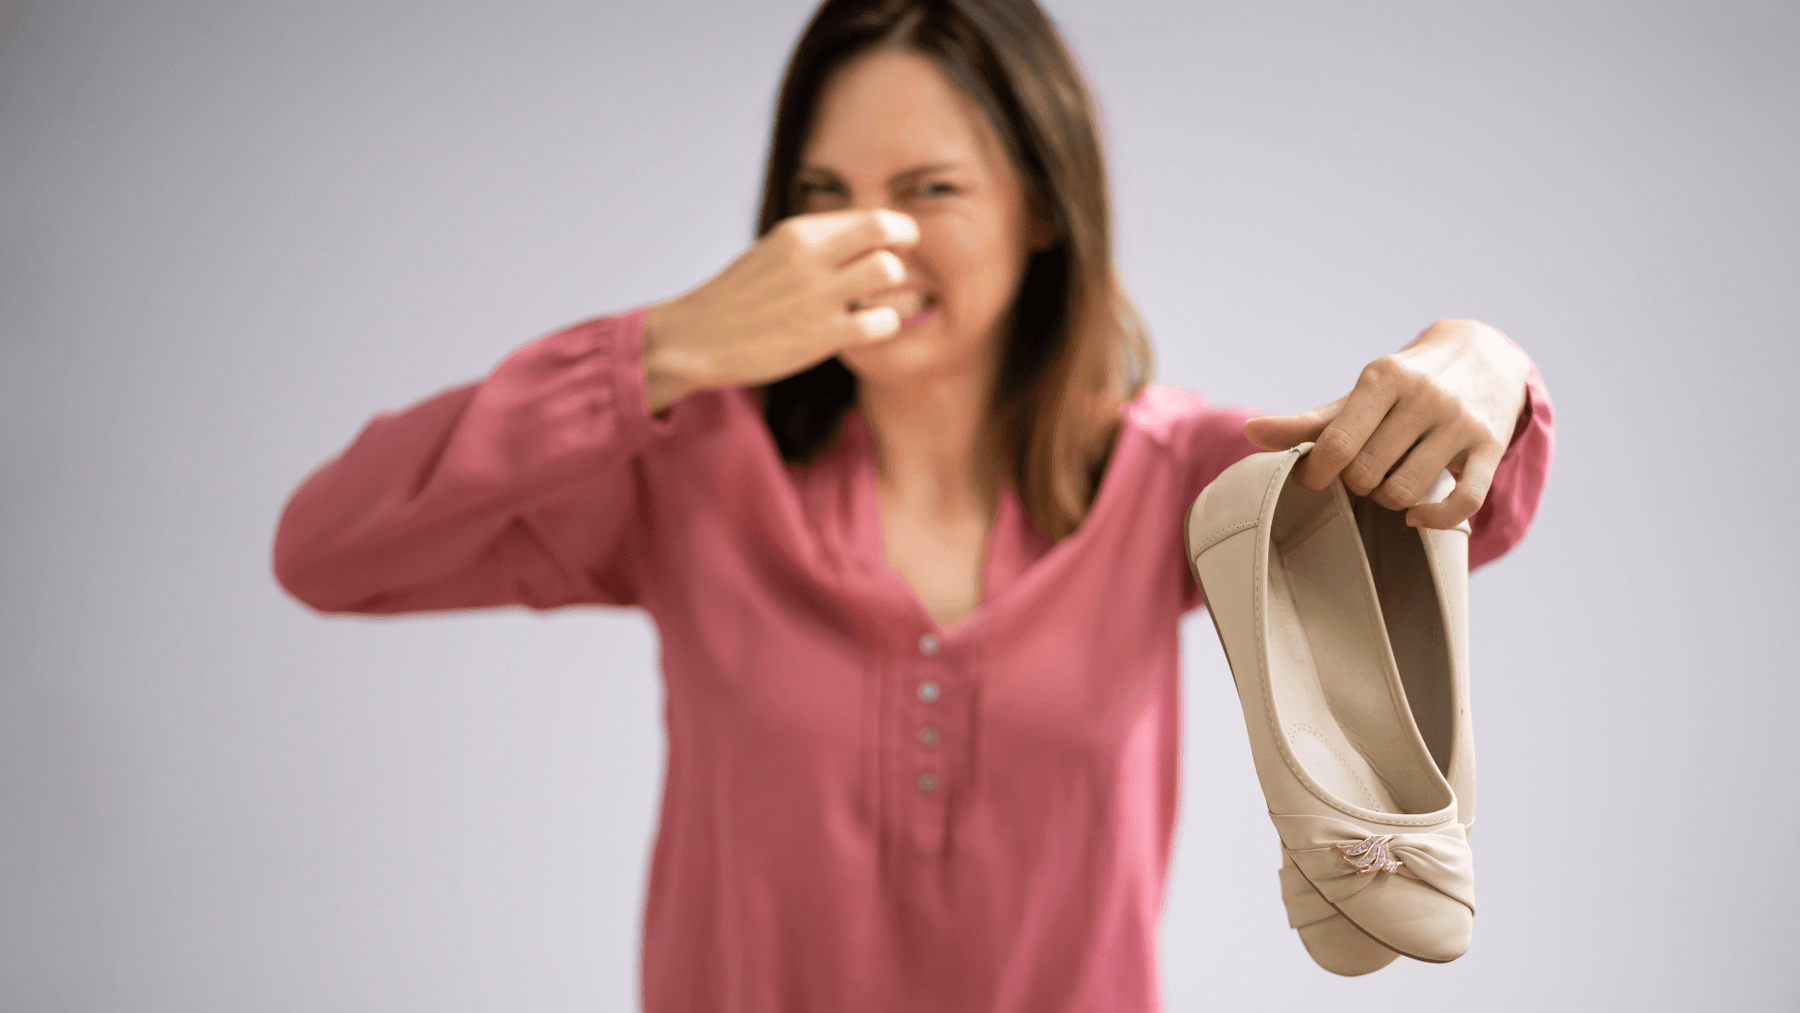 woman holding up shoes and holding her nose, expressing how stinky the shoes are.